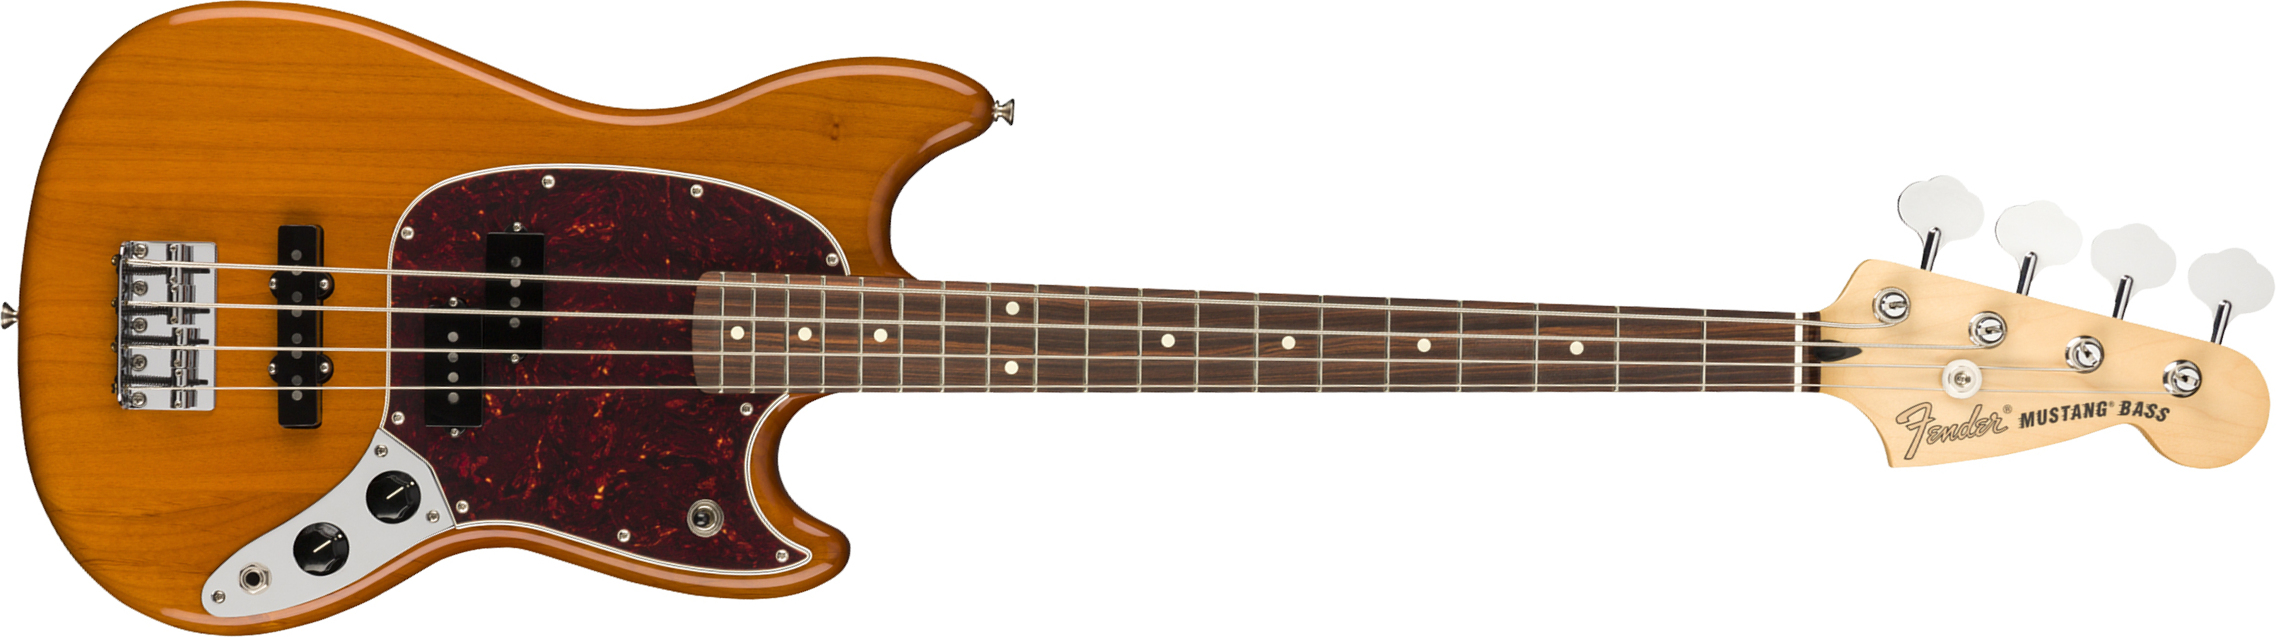 Fender Player Mustang Bass Pj Mex Pf - Aged Natural - Electric bass for kids - Main picture